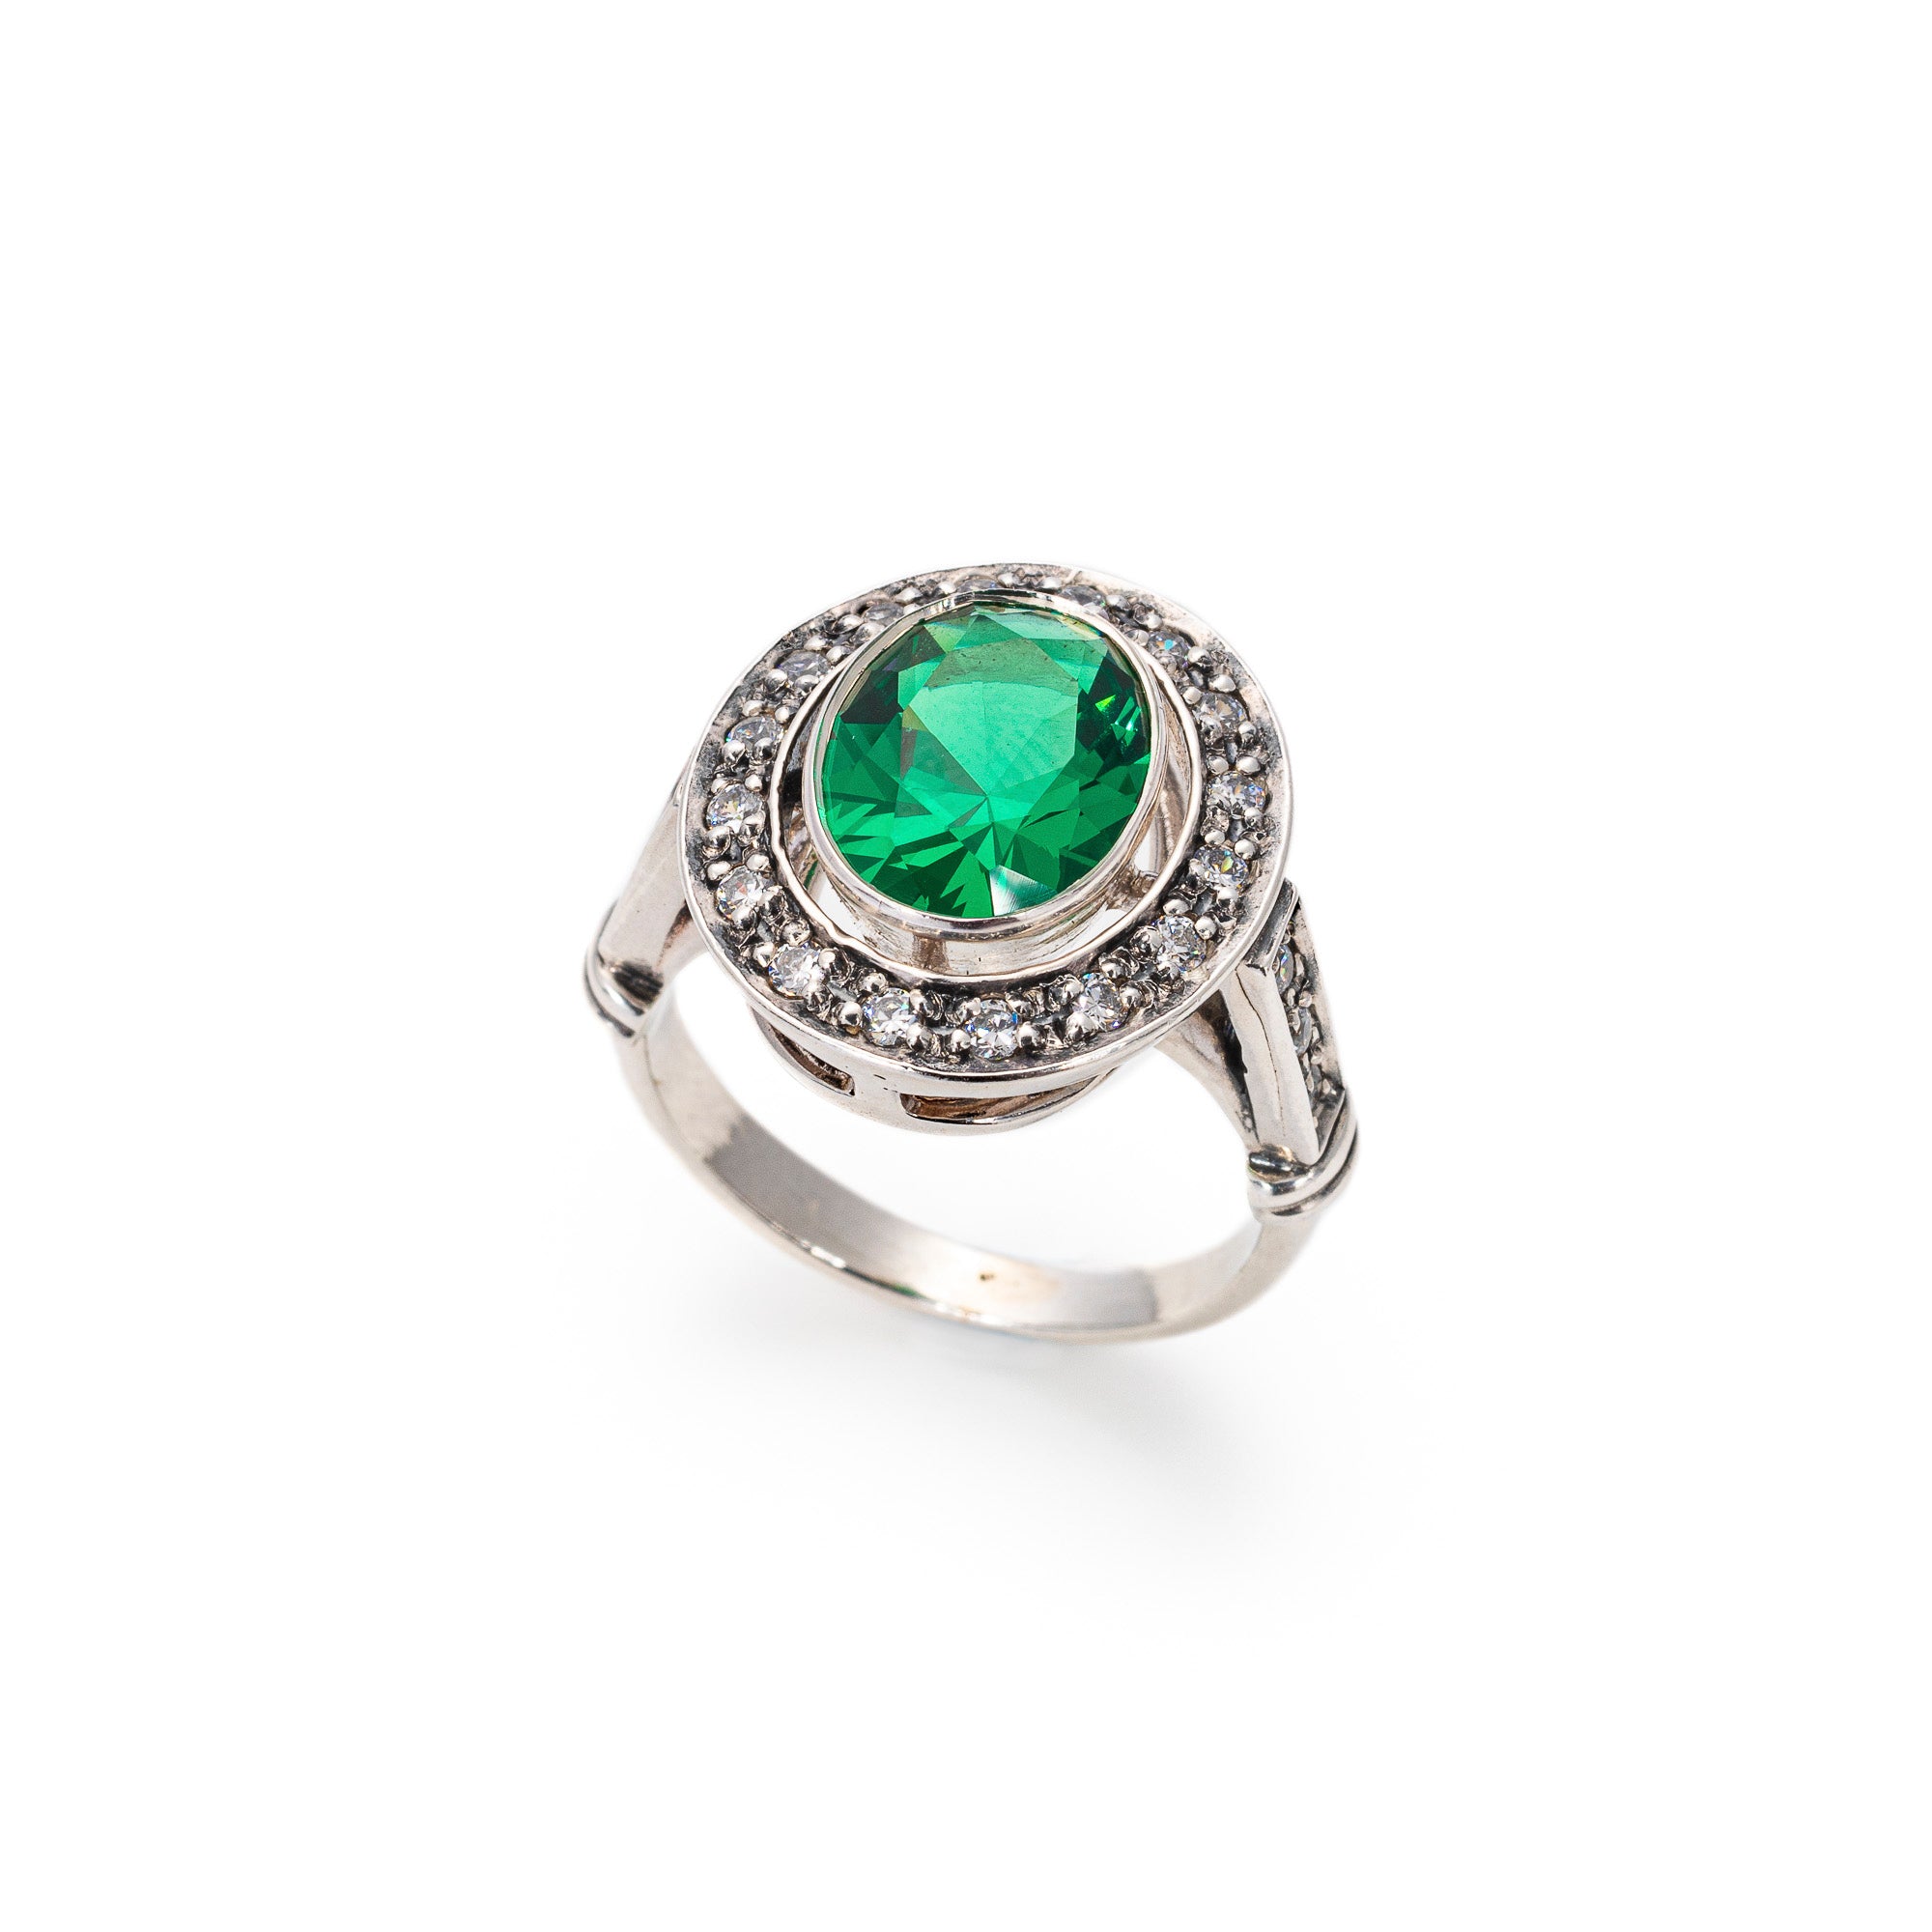 Vintage Emerald Ring - Green Statement Ring - Antique Oval Ring